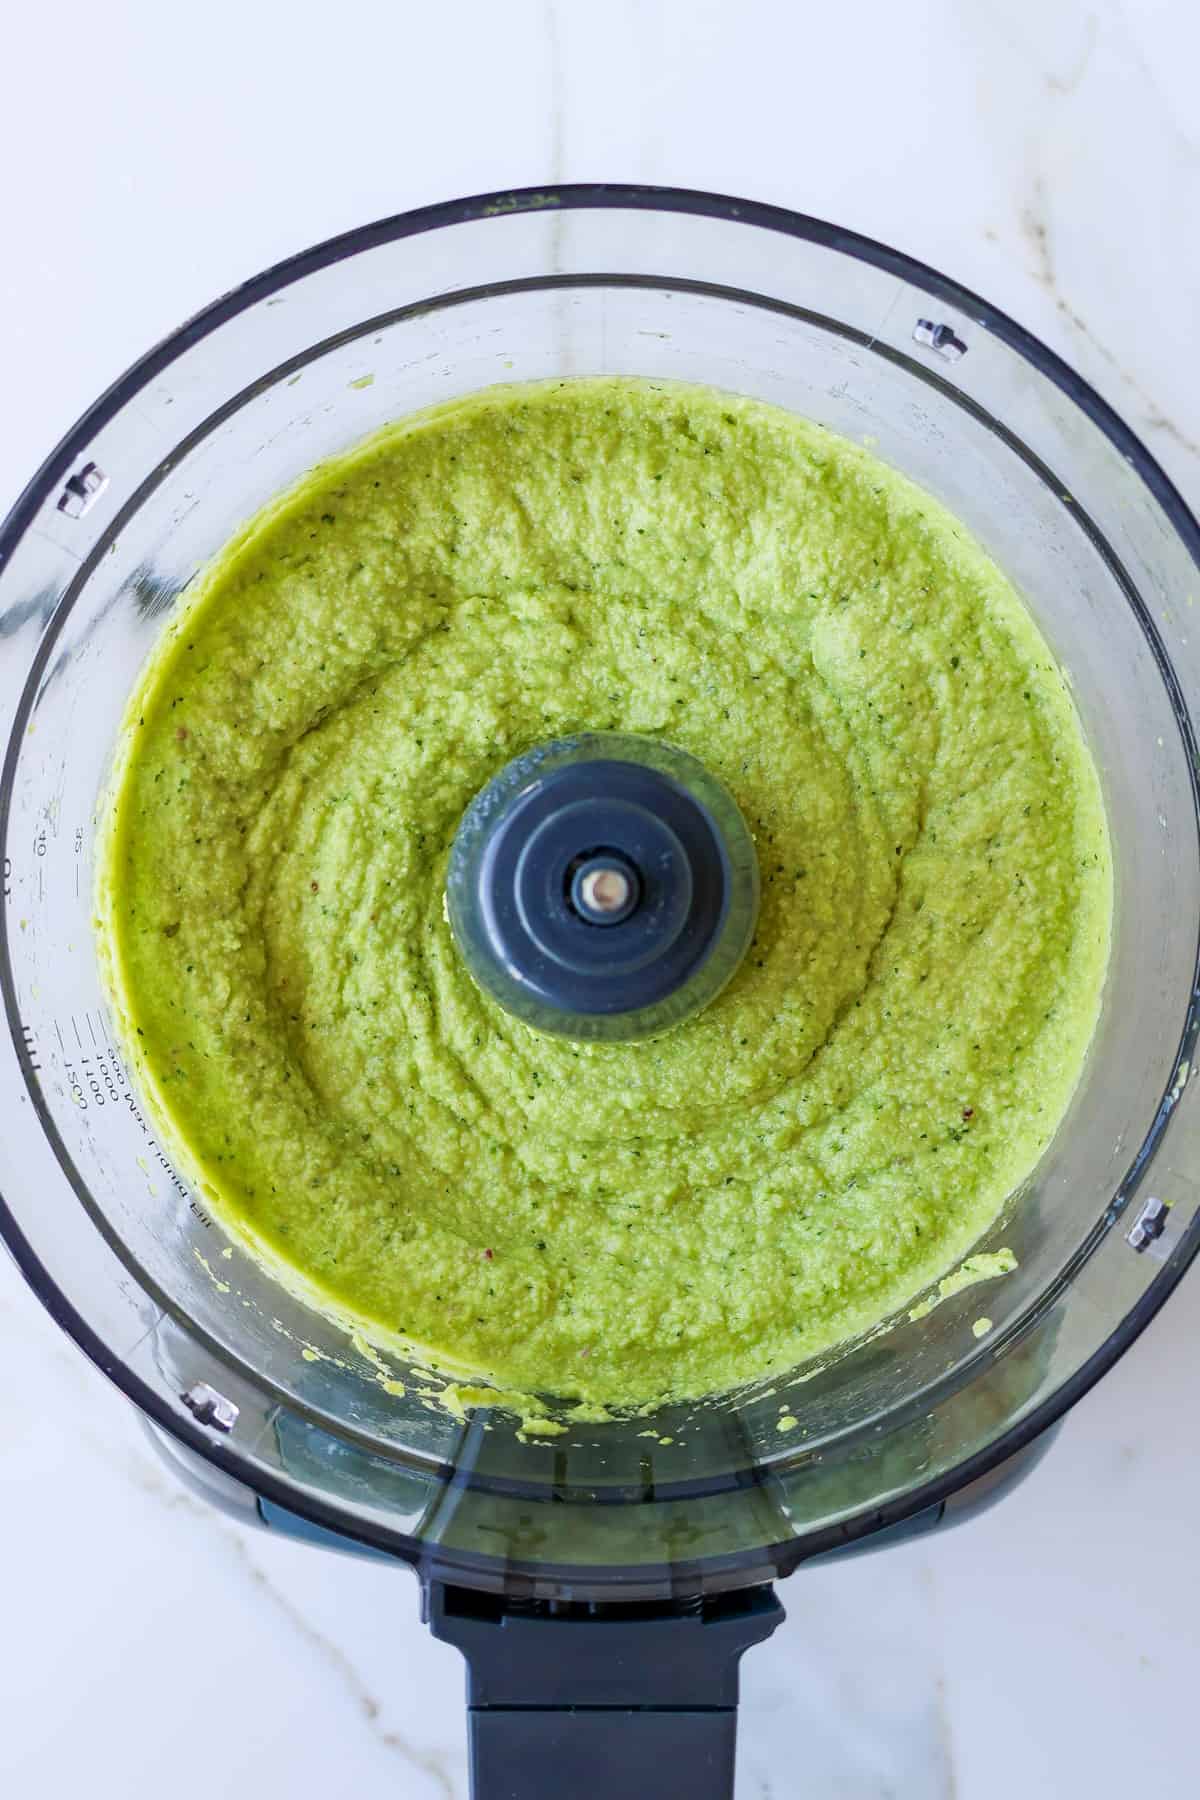 Blended guacamole in a food processor.